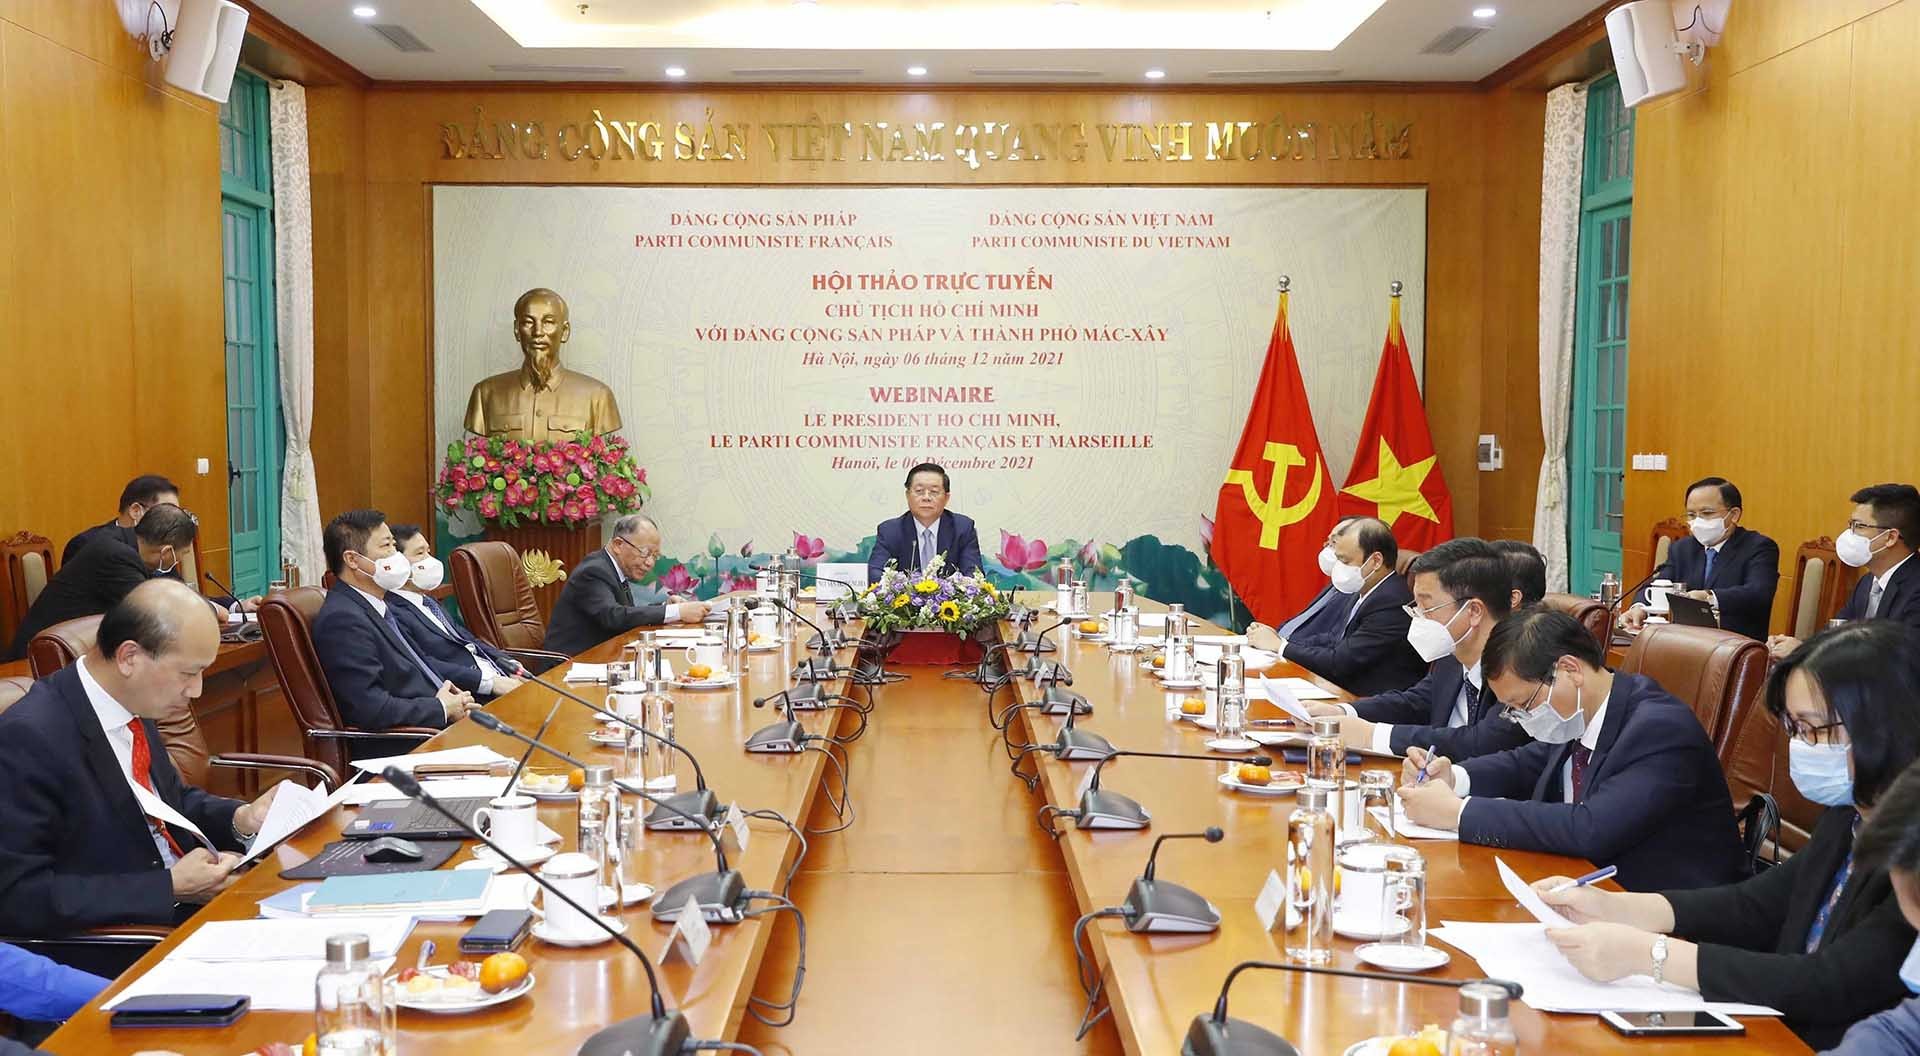 Online seminar highlights President Ho Chi Minh's role to French Communist Party